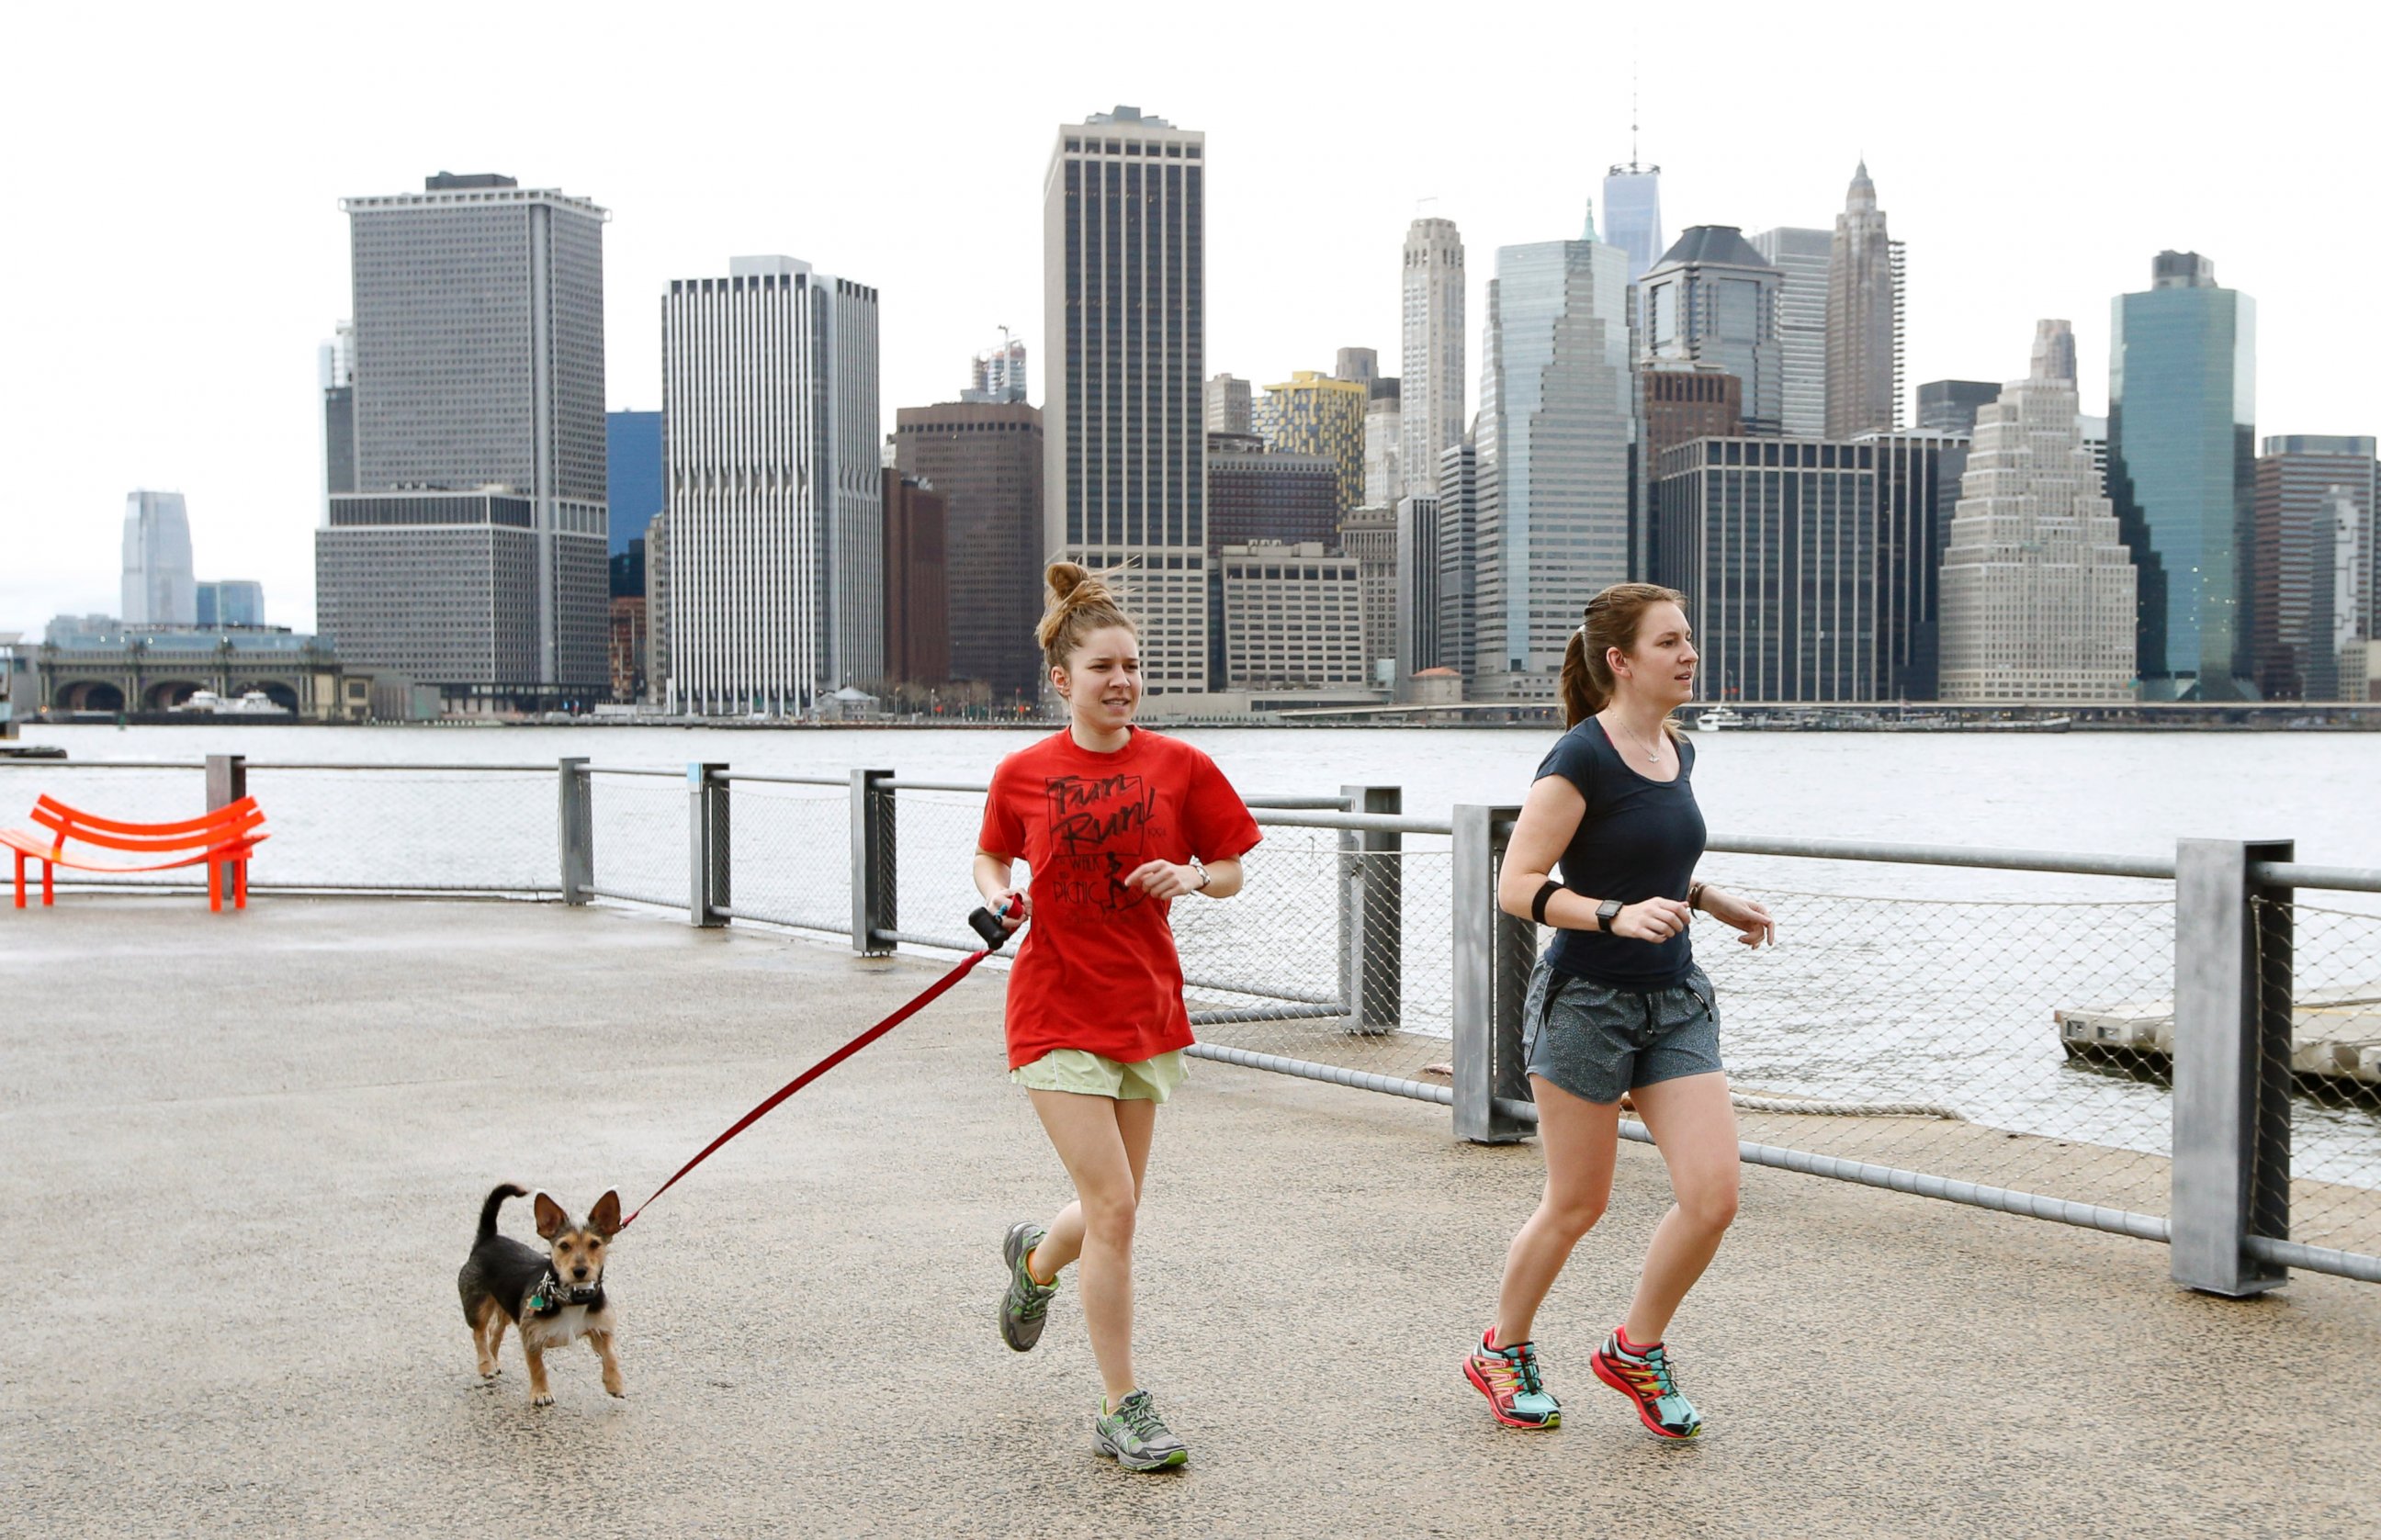 PHOTO: Joggers dressed in shorts and T-shirts run in Brooklyn Bridge Park, in New York, as the Lower Manhattan skyline is seen behind them, Dec. 24, 2015. 